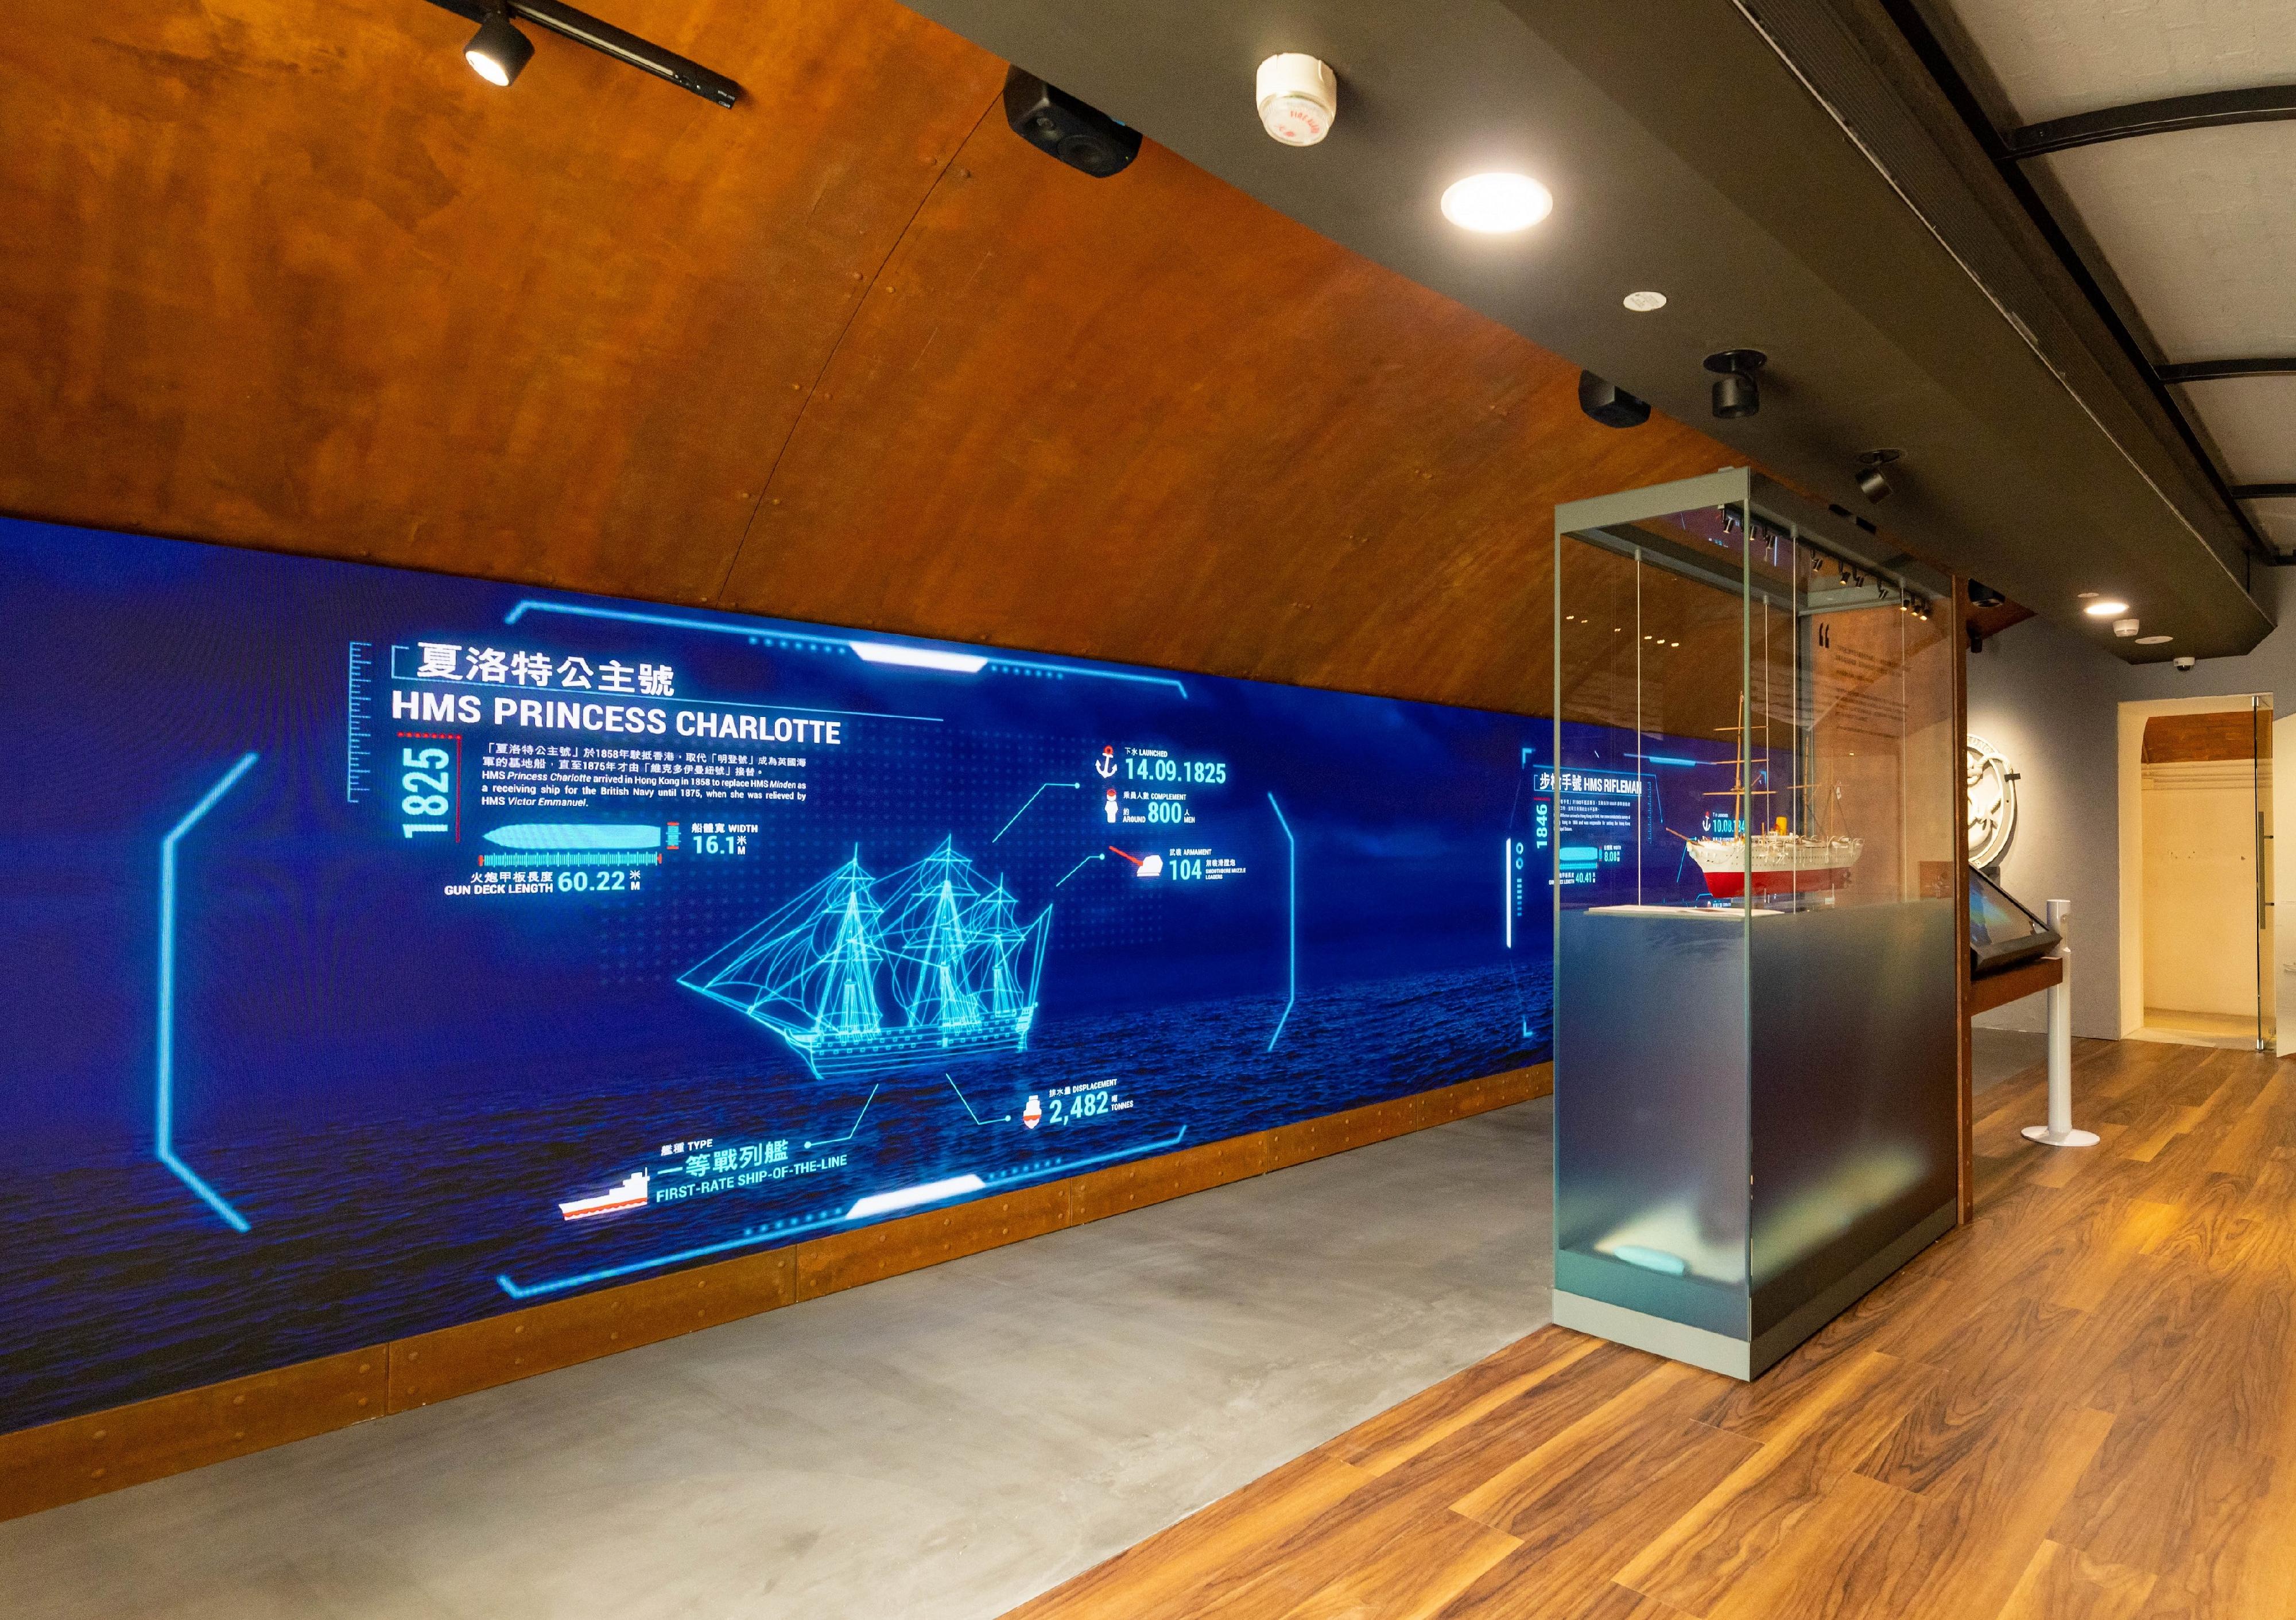 The Hong Kong Museum of Coastal Defence will reopen to the public from tomorrow (November 24) and bring forward a new permanent exhibition, "The Story of Hong Kong Coastal Defence". Picture shows a mutimedia display in the "Port Facilities" gallery.